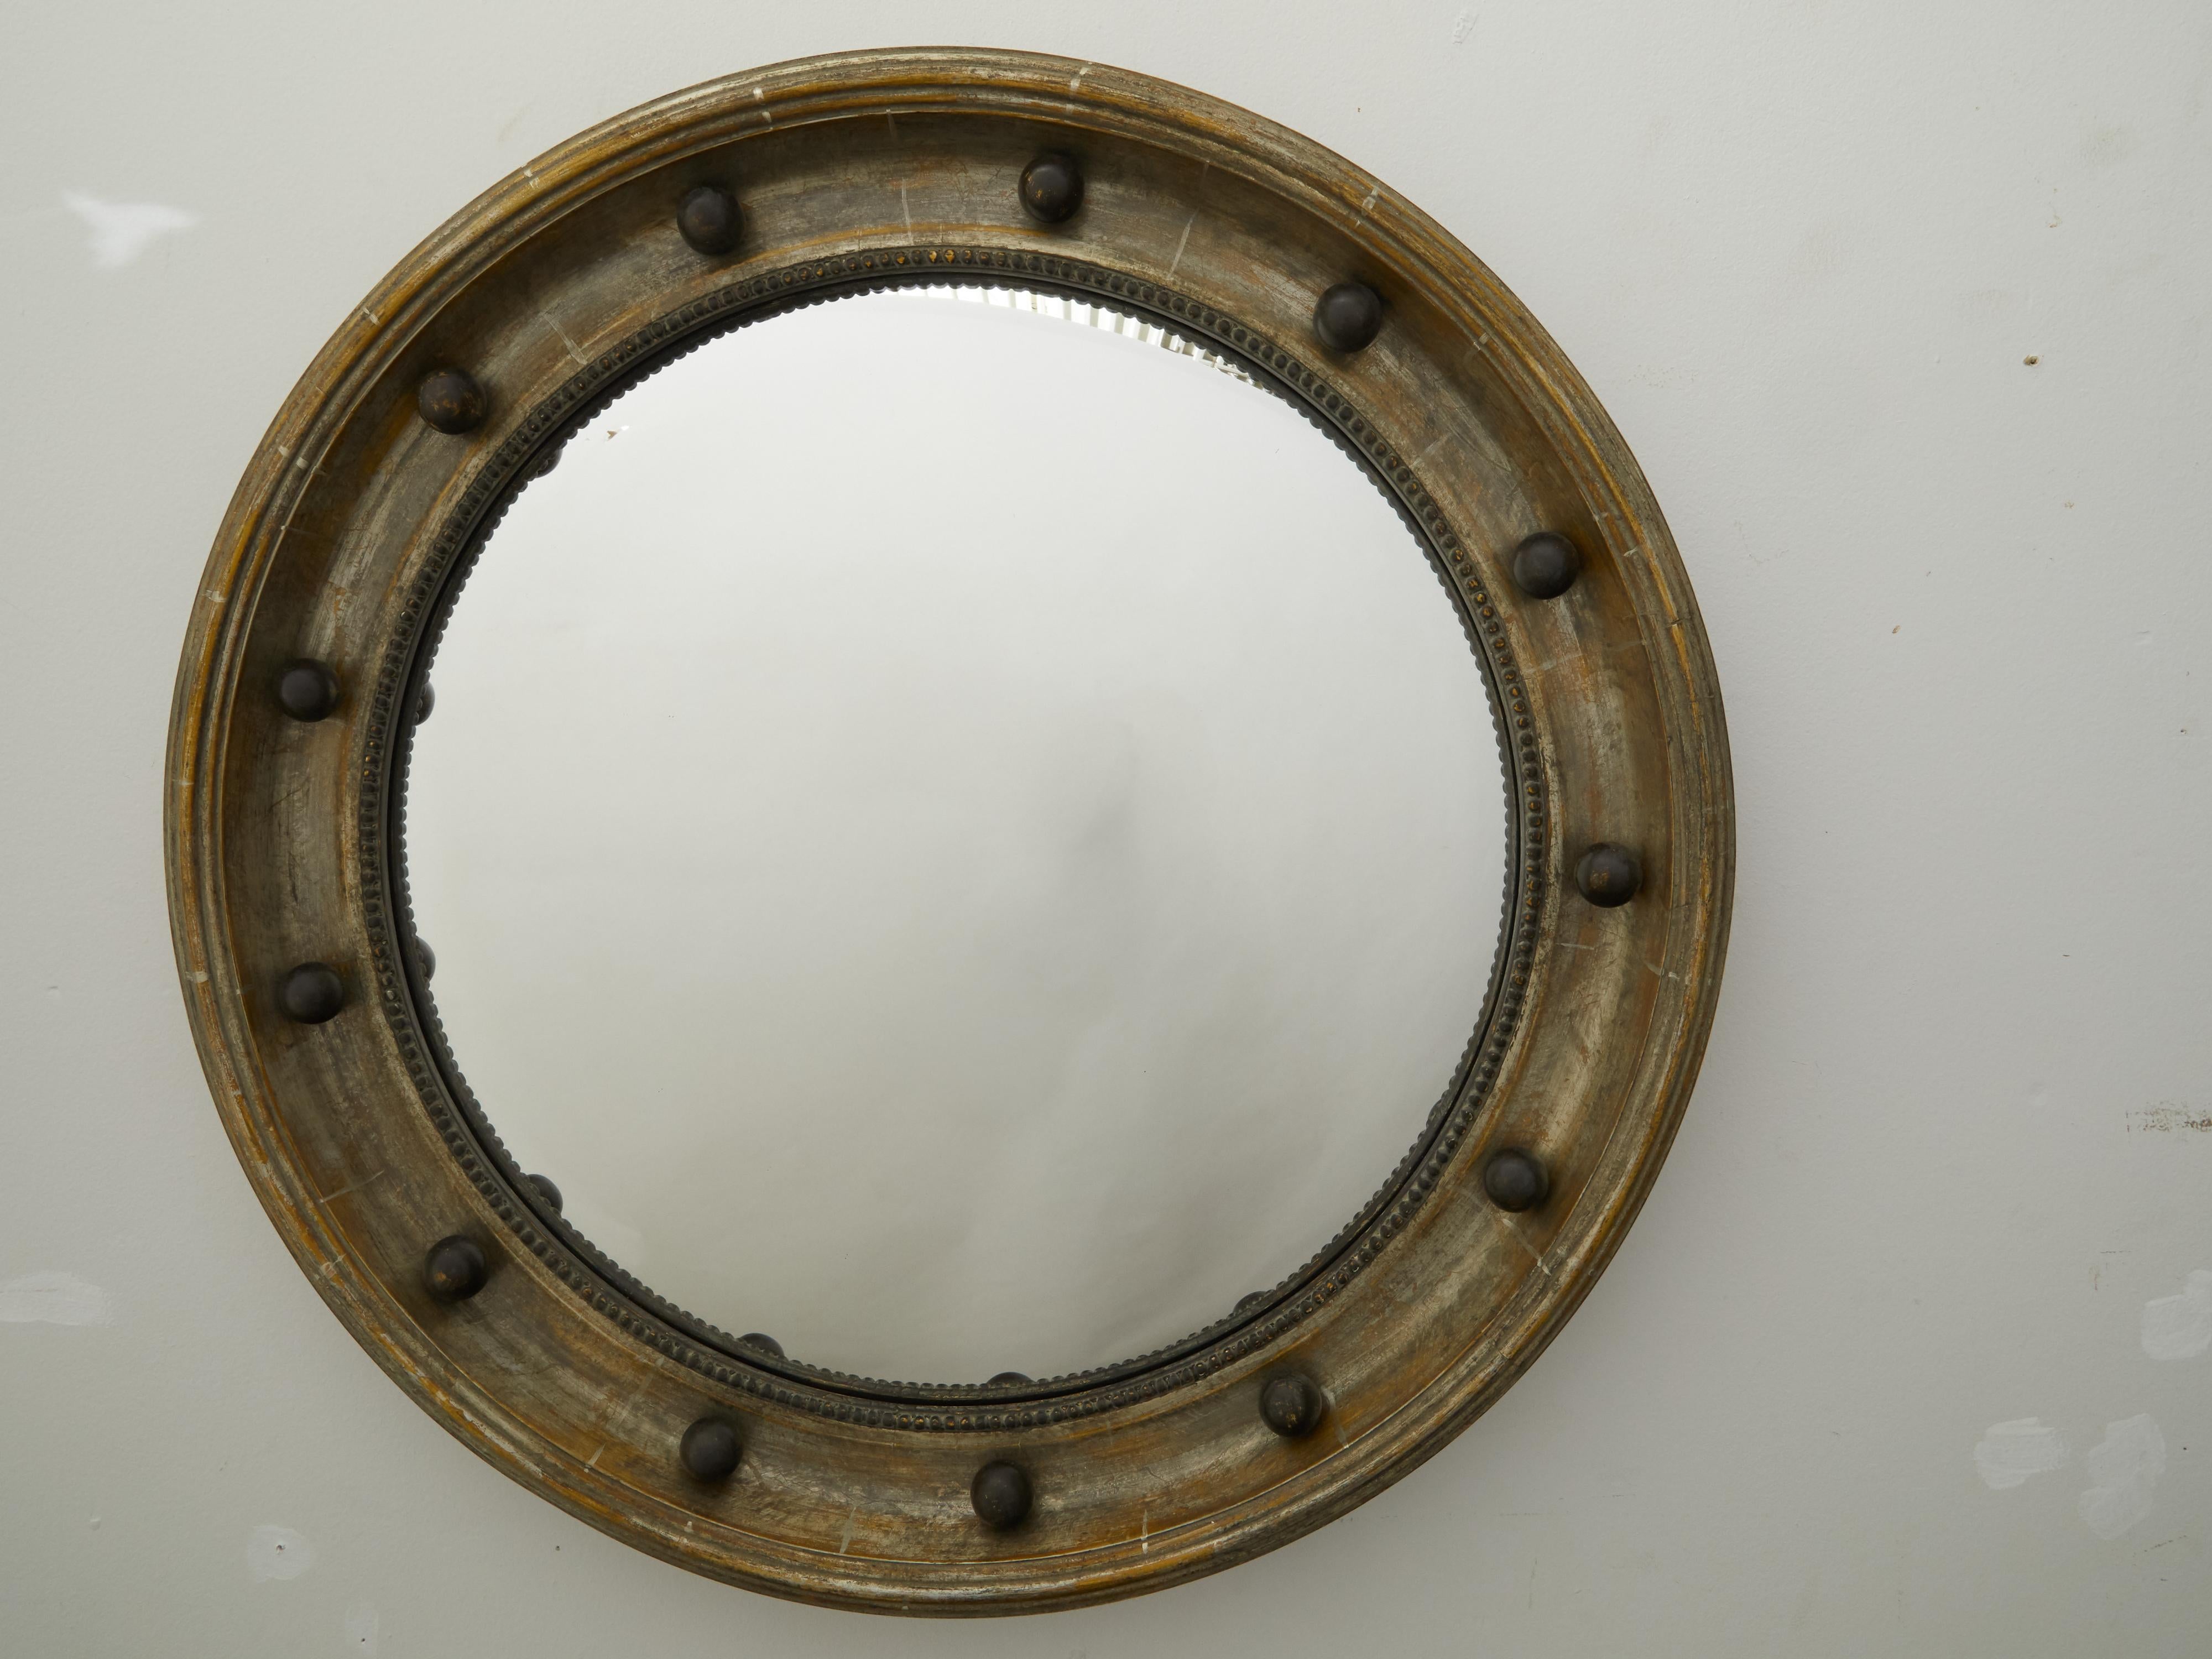 An English turn of the century silver leaf convex bullseye mirror from the early 20th century, with ebonized accents and beaded motifs. Created in England during the early years of the 20th century, this silver leaf girandole mirror features a